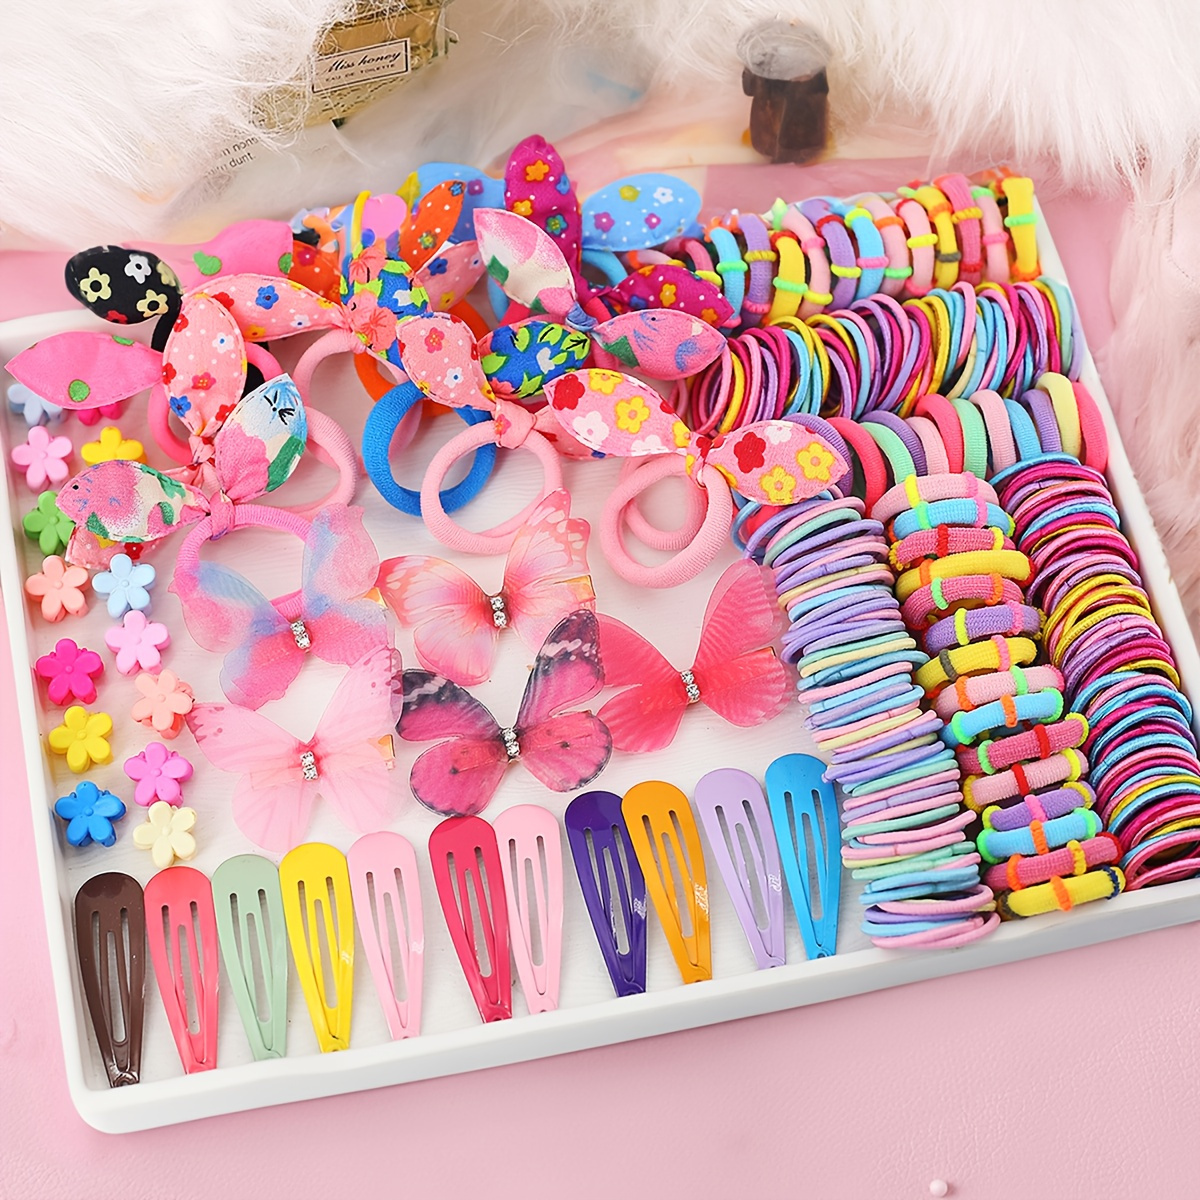 780PCS Color Clear Elastic Hair Bands Clips Mini Hair Claw Clips Rubber  Bands Hair Ties Kit